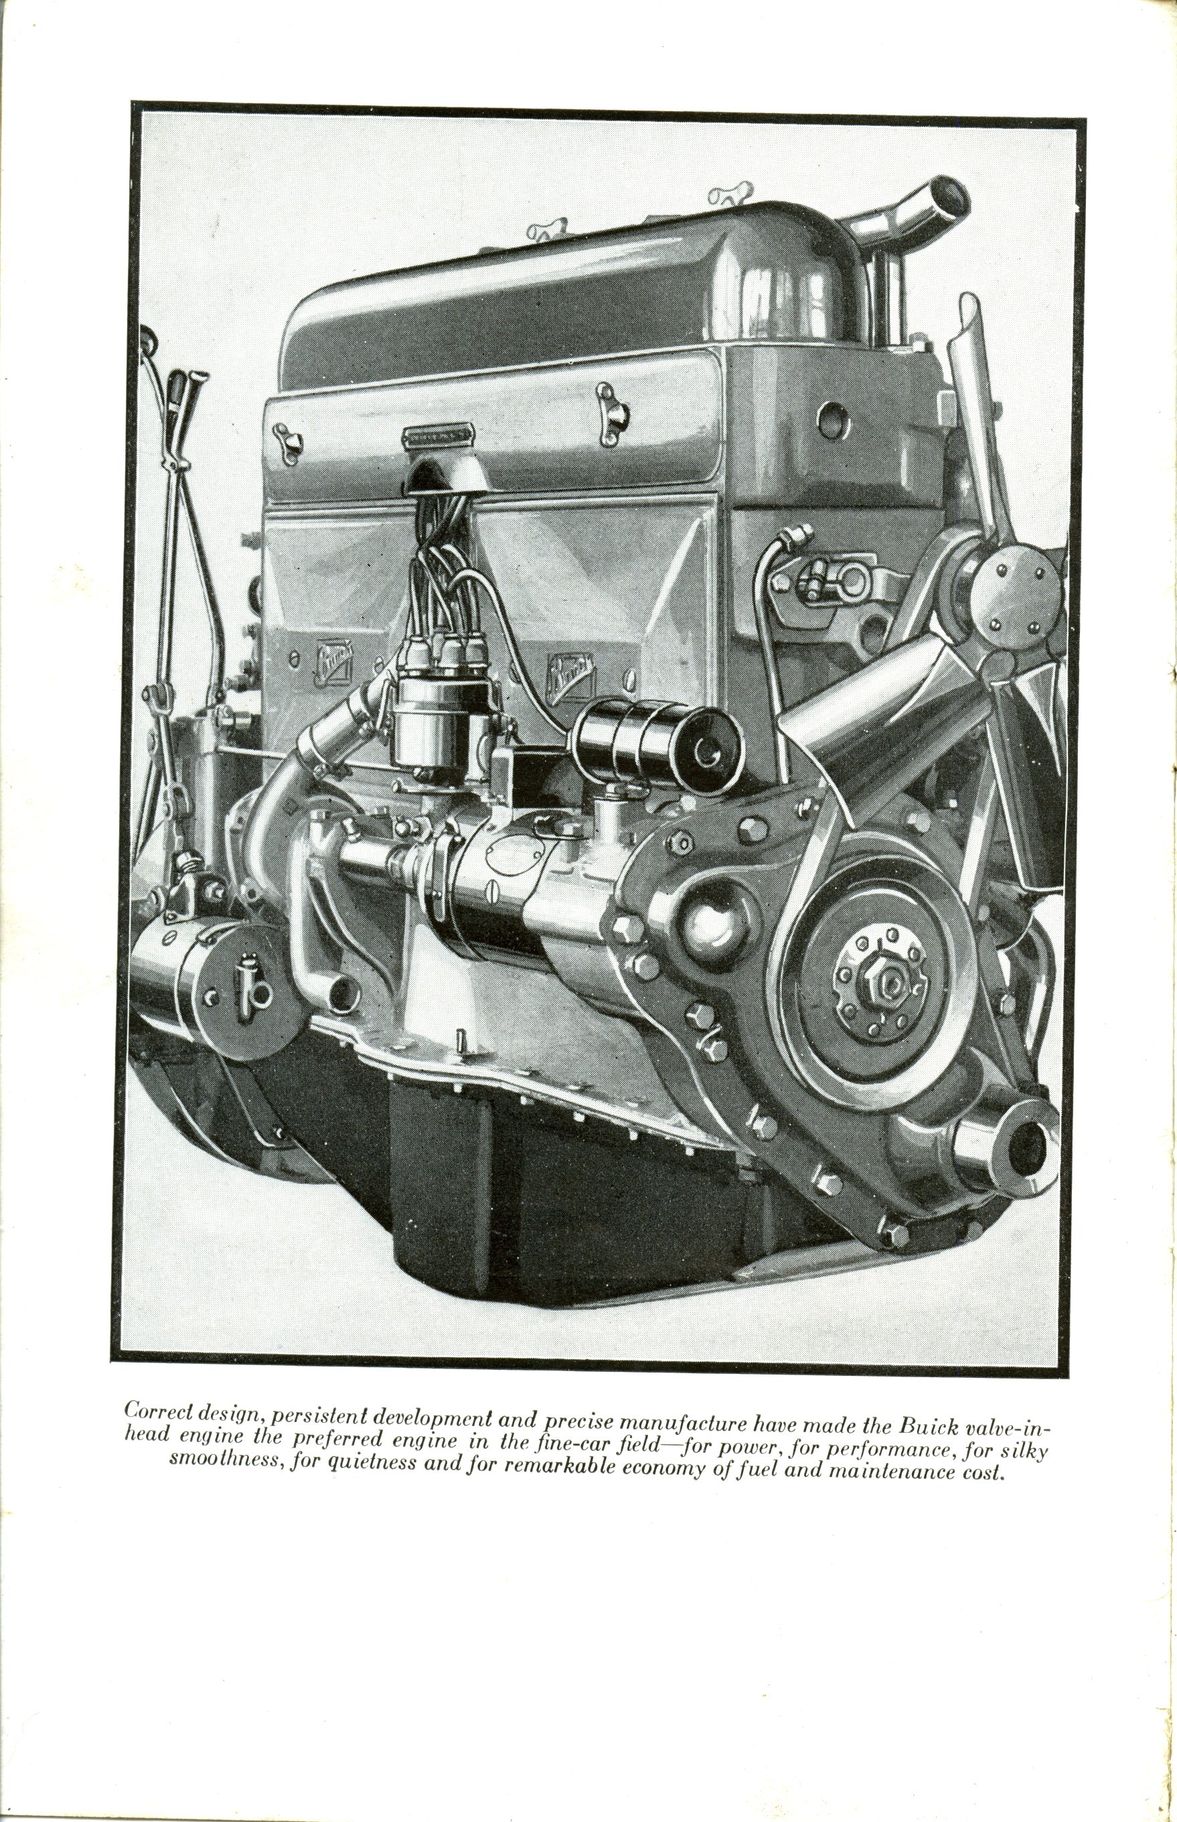 1930 Buick Book of Facts-02